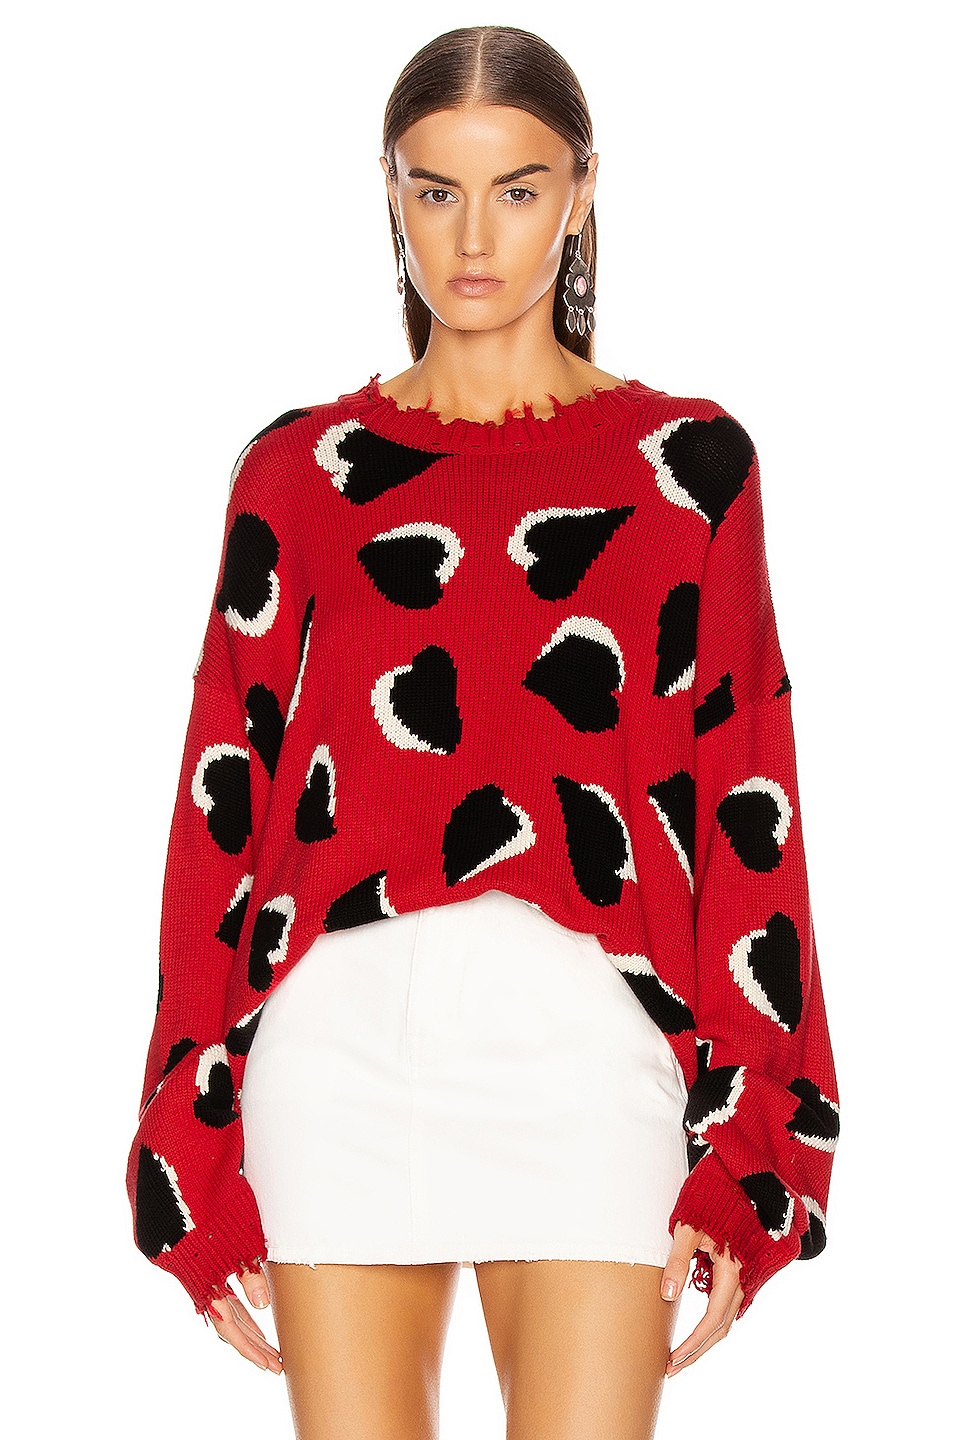 R13 Hearts Oversized Sweater in Red & Hearts | FWRD